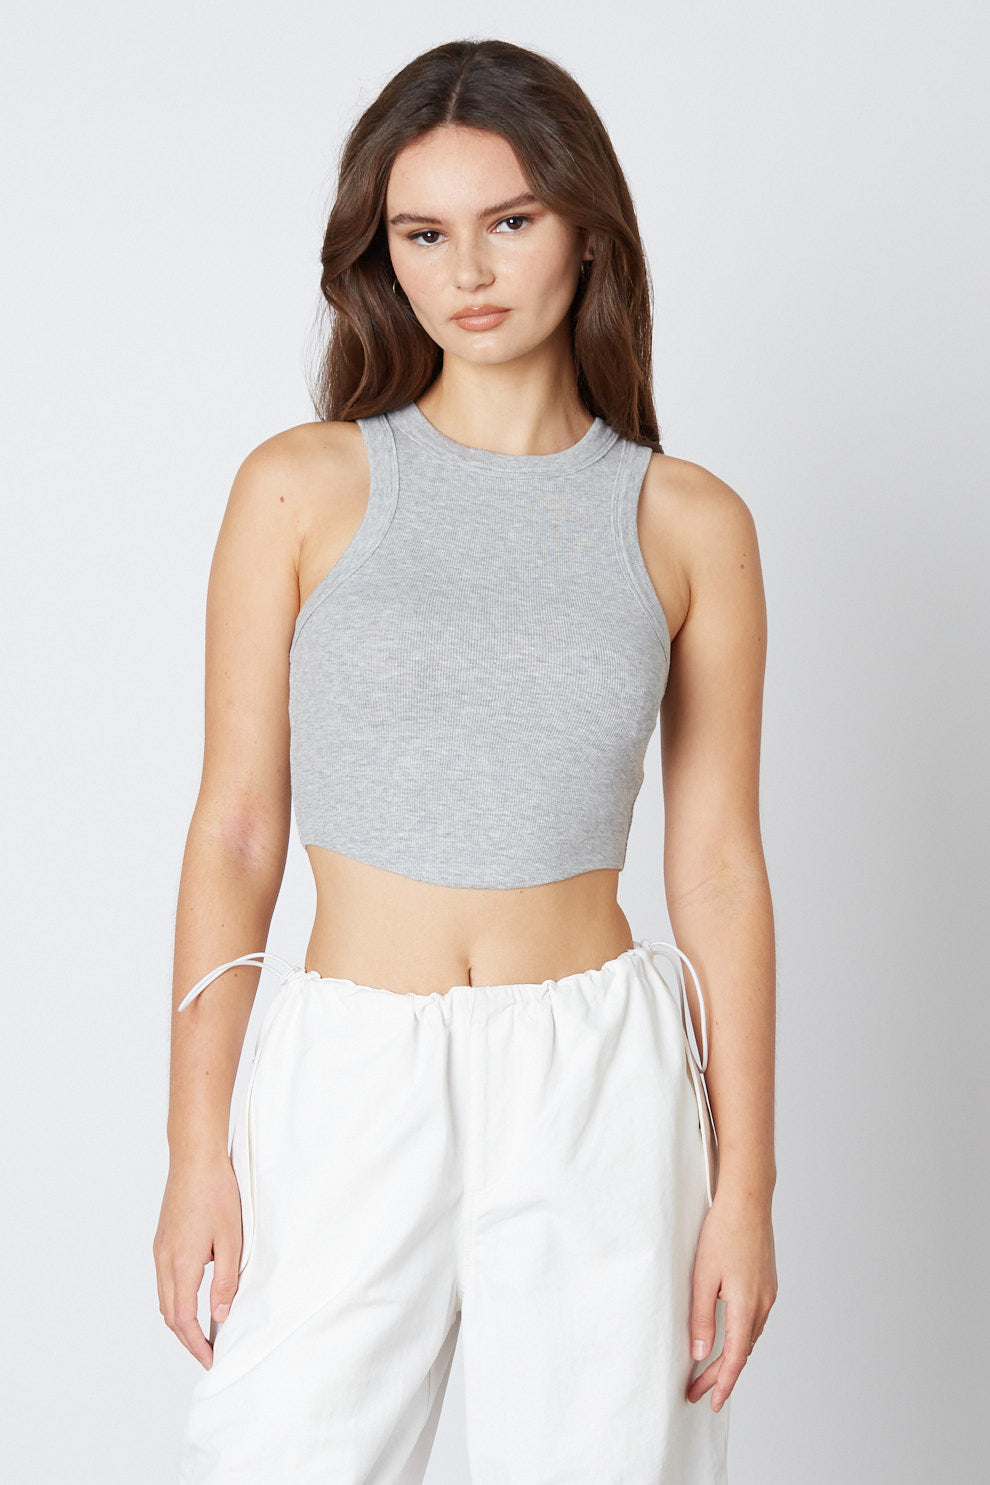 Heather Grey Ribbed Racer Back Tank Front